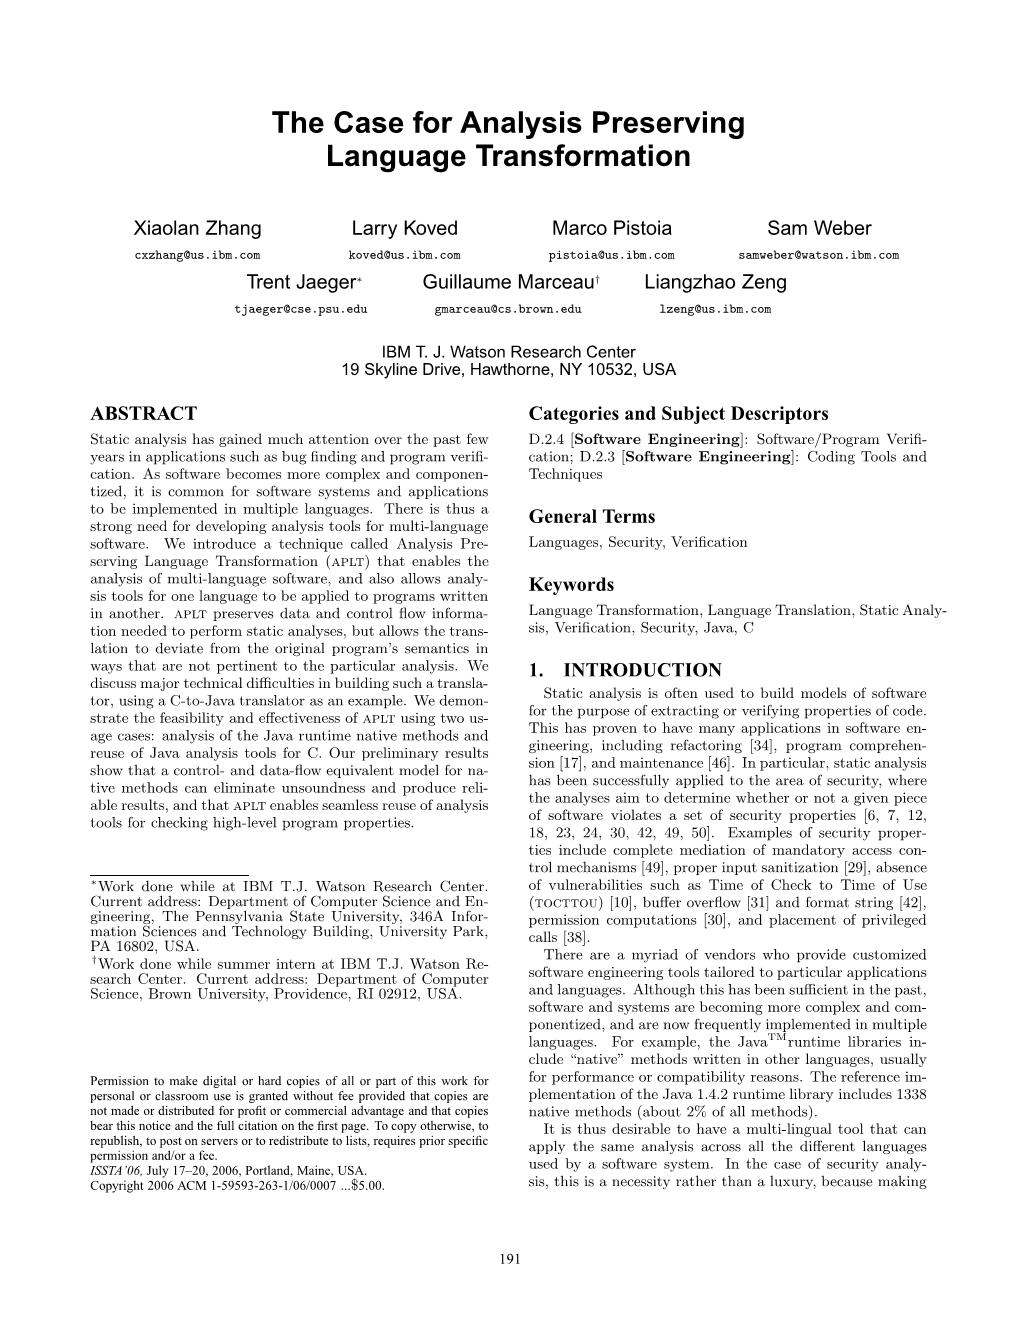 The Case for Analysis Preserving Language Transformation